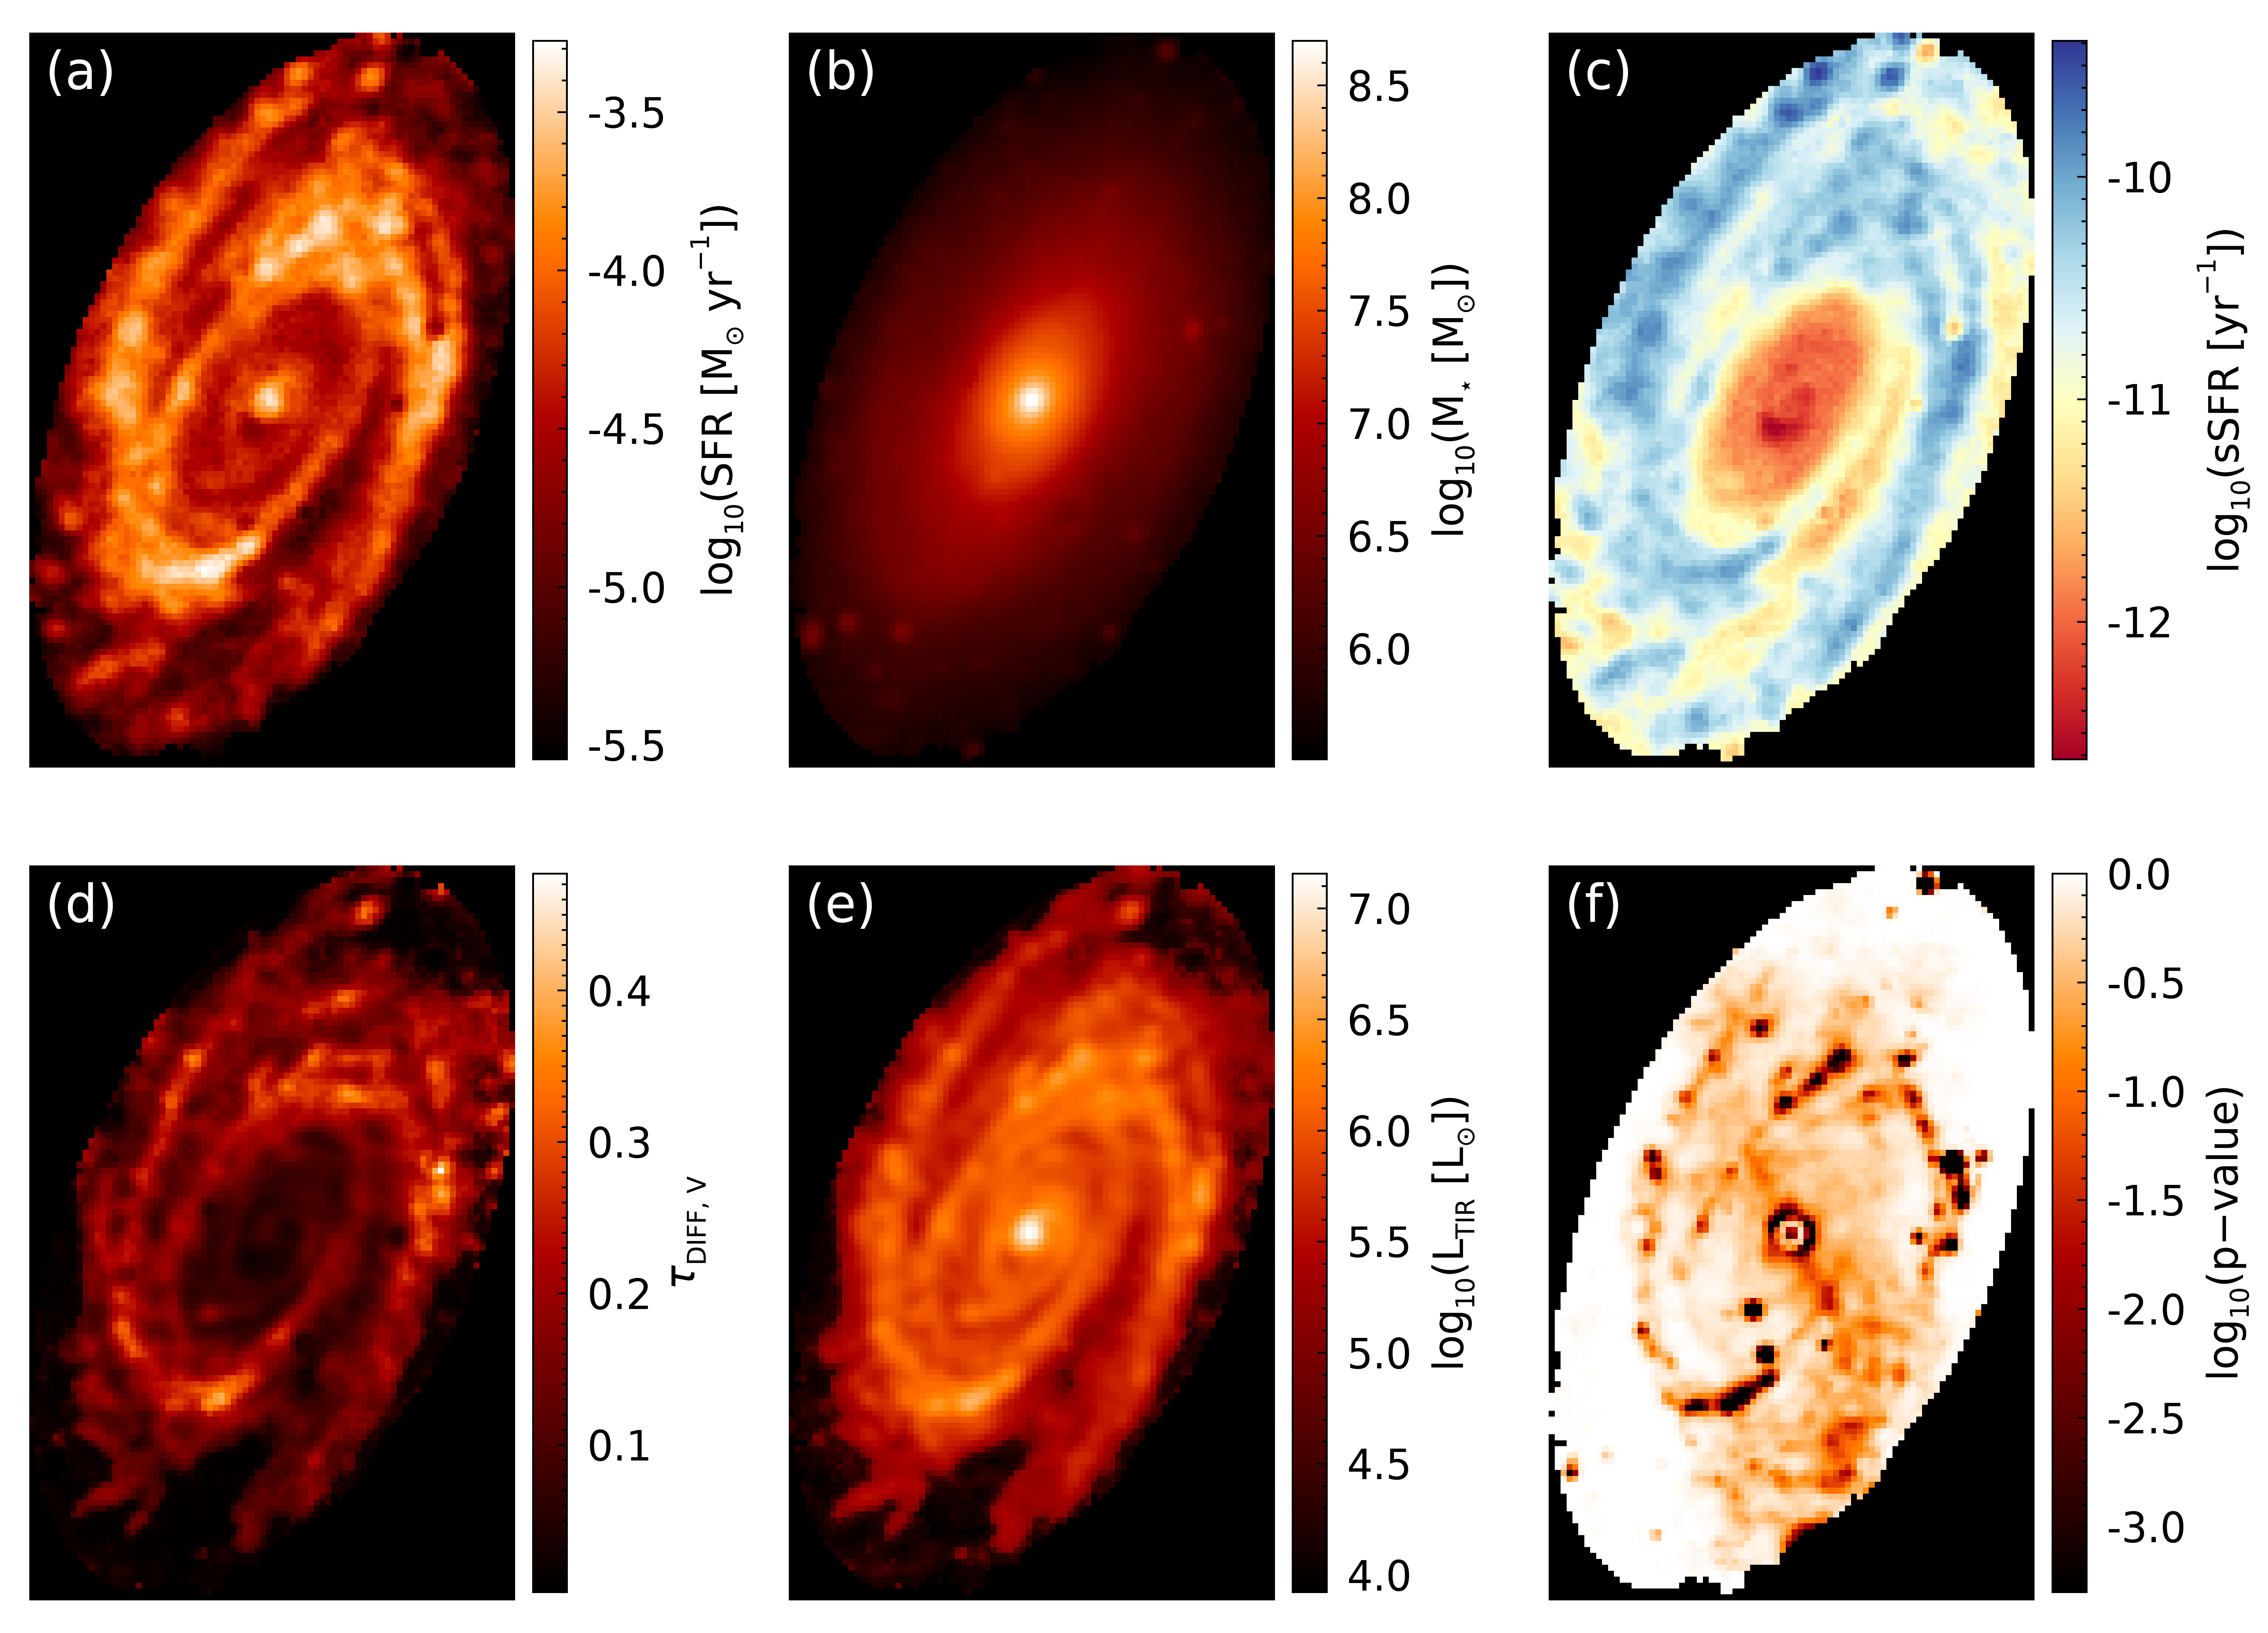 maps of the derived spatially resolved properties of M81.